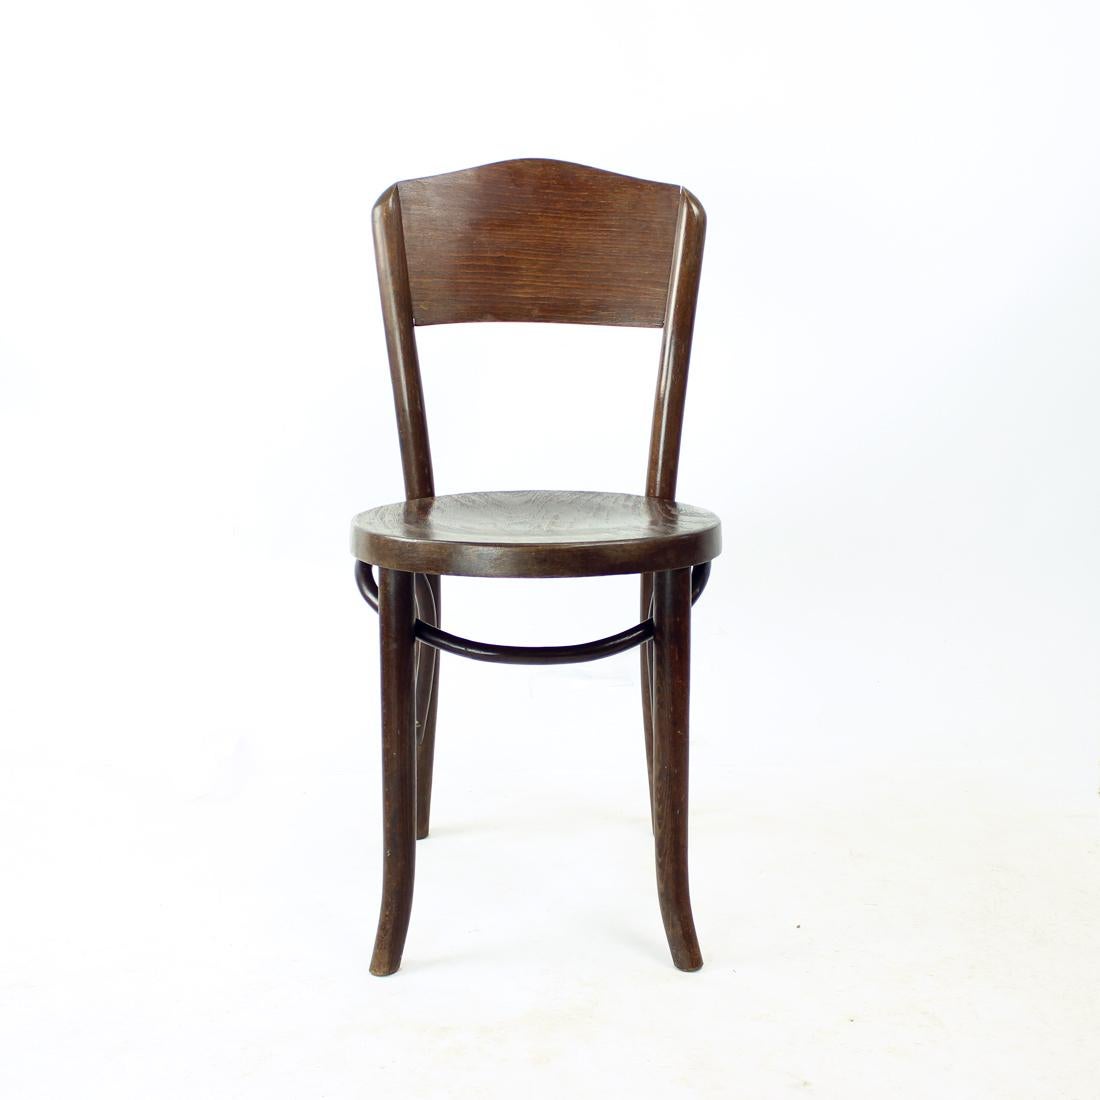 Beautiful vintage chair designed by Thonet. Bentwood details and construction makes this piece a timeless item. Plywood seat and backrest. Strong oak wood. The chair was partially restored to make sure the construction is strong and put together.